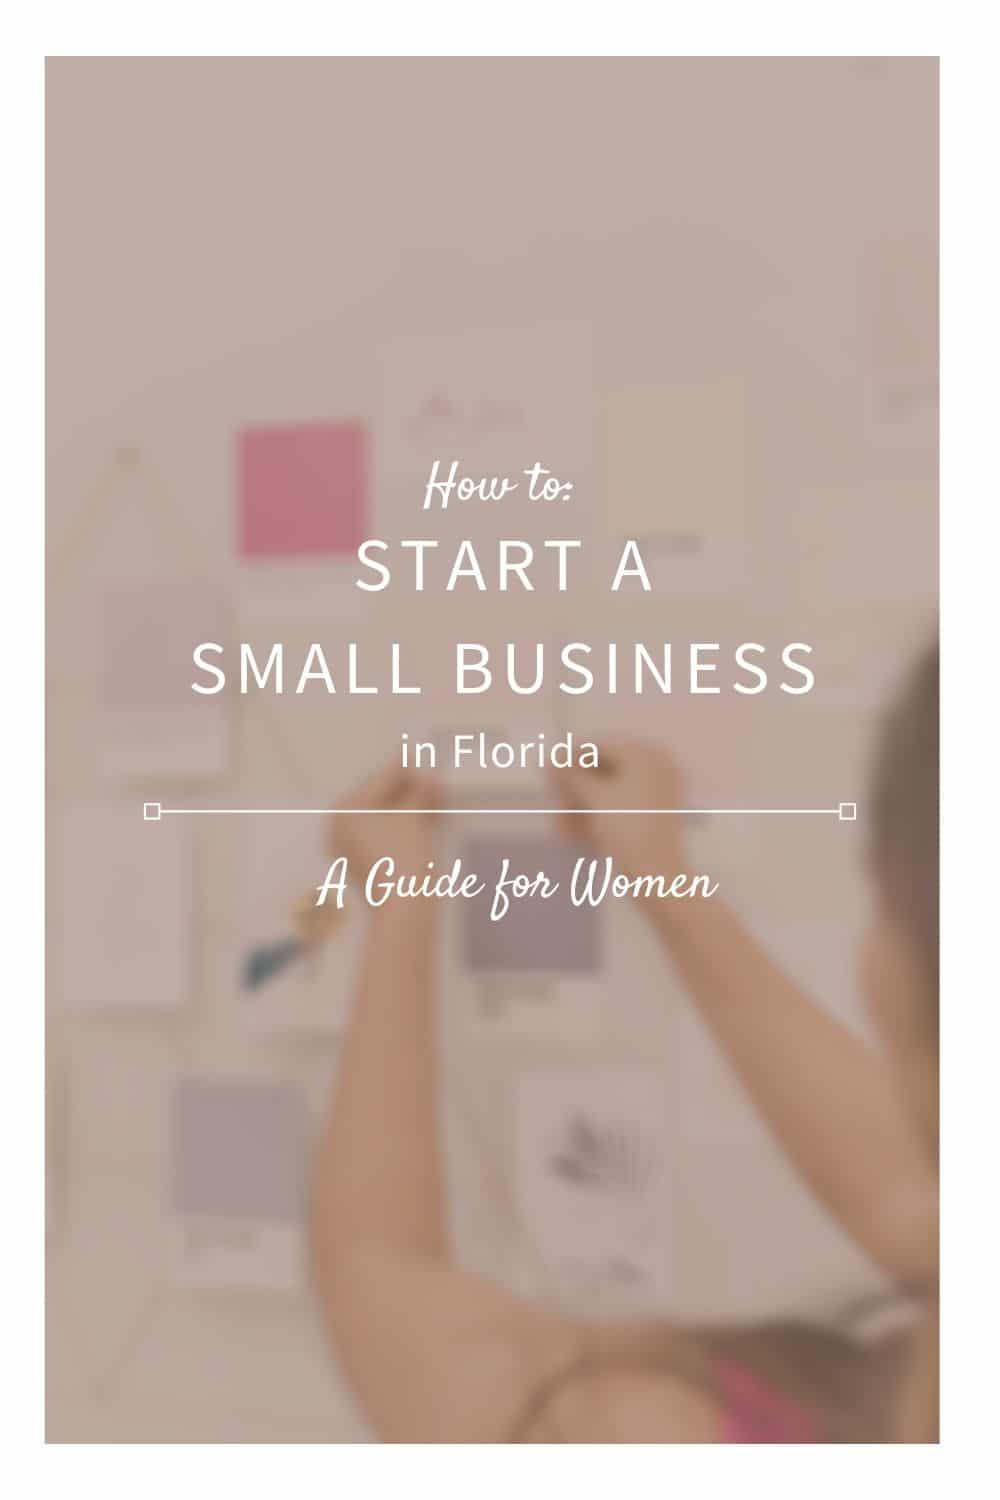 How to Start a Small Business in Florida